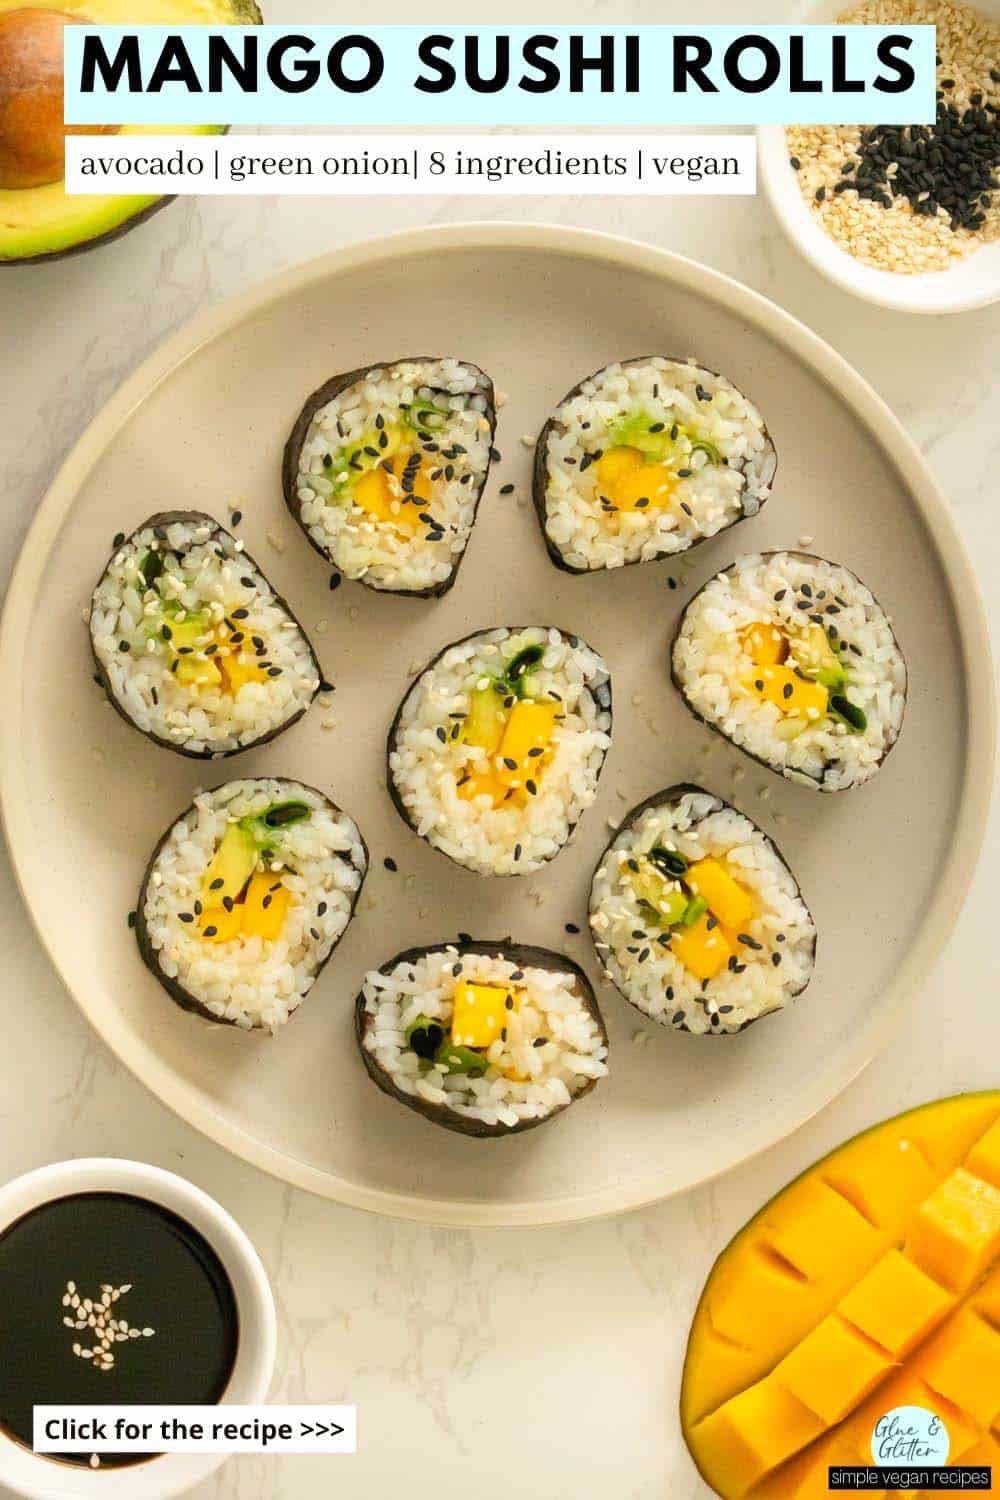 mango roll sushi on a plate with sesame seeds surrounded by soy sauce, mango, avocado, and a cupful of sesame seeds, text overlay